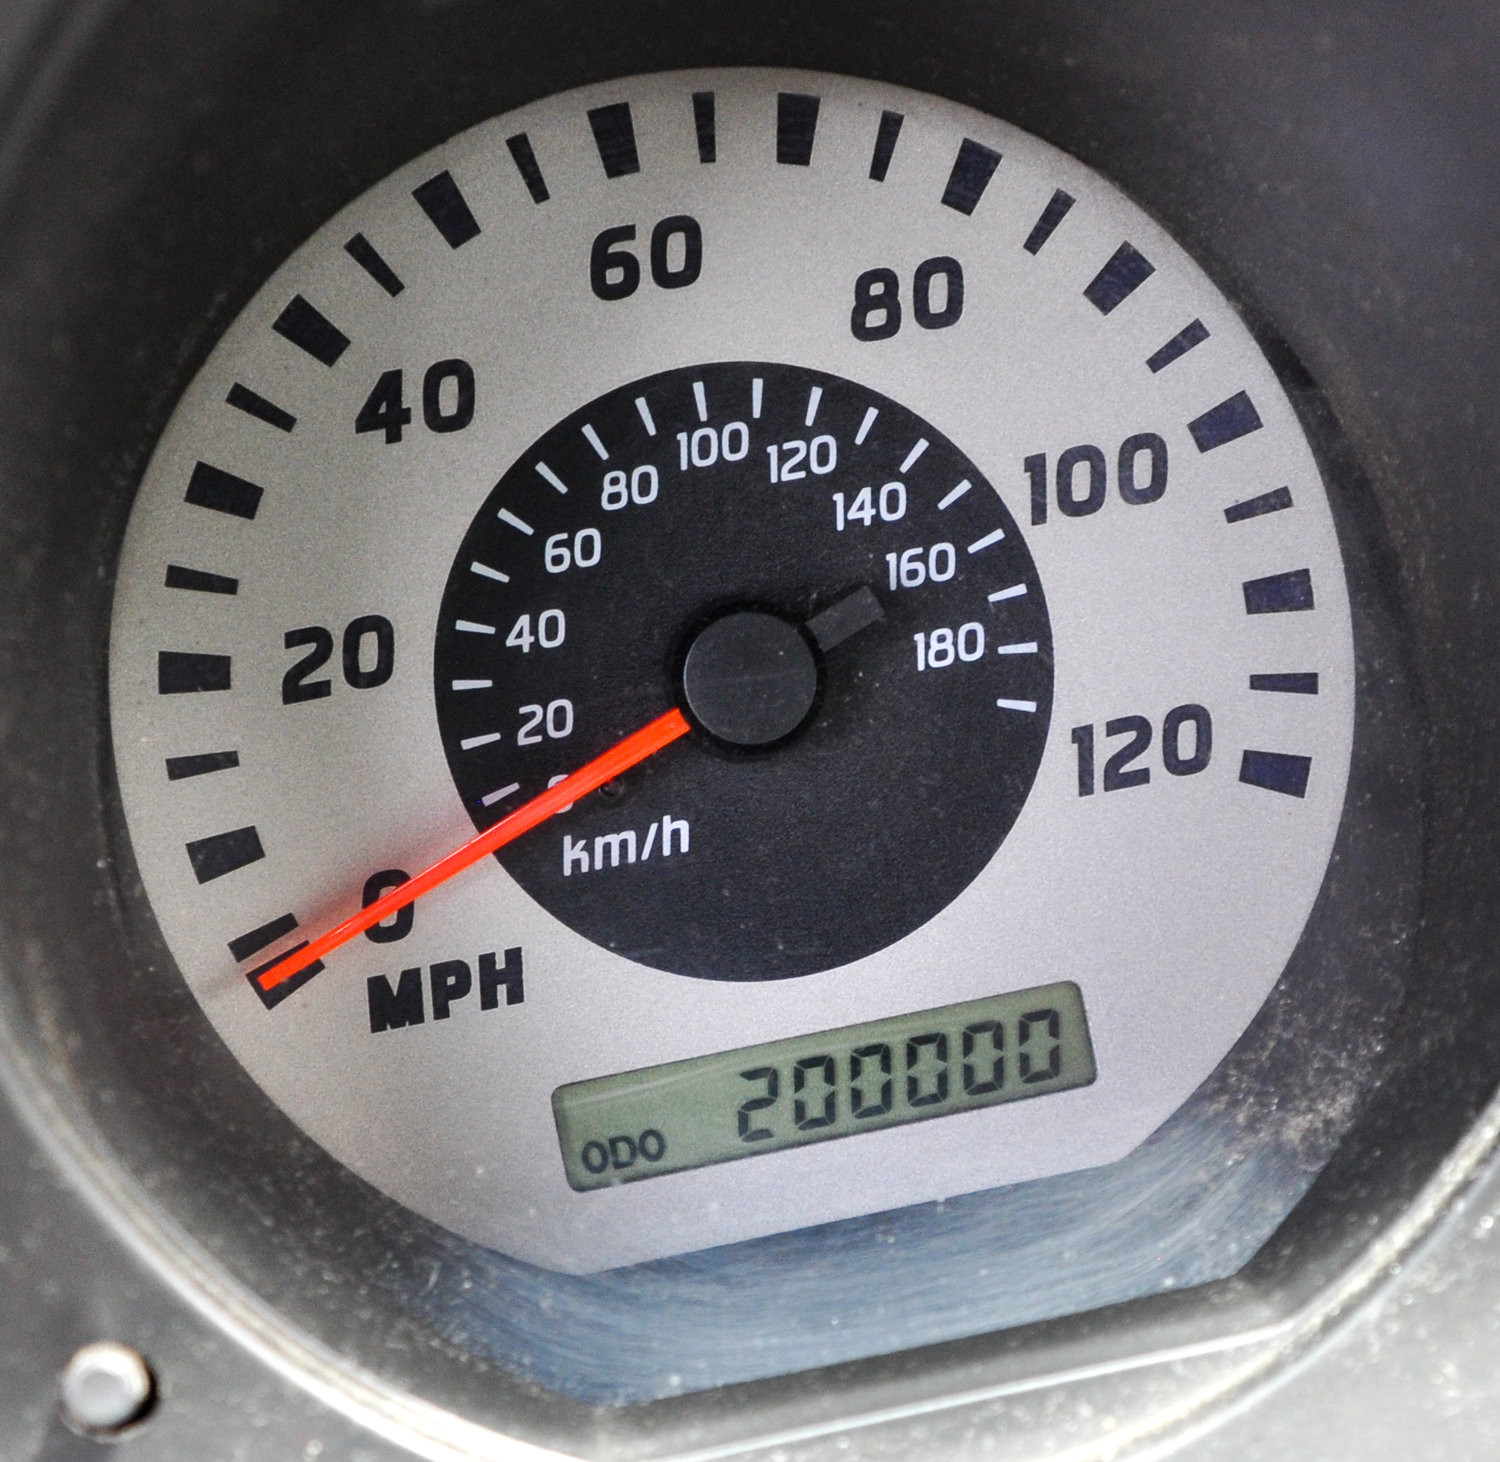 I noticed that the odometer was about to roll over to 200,000 miles, so I drove slowly, hoping to capture the moment for posterity.